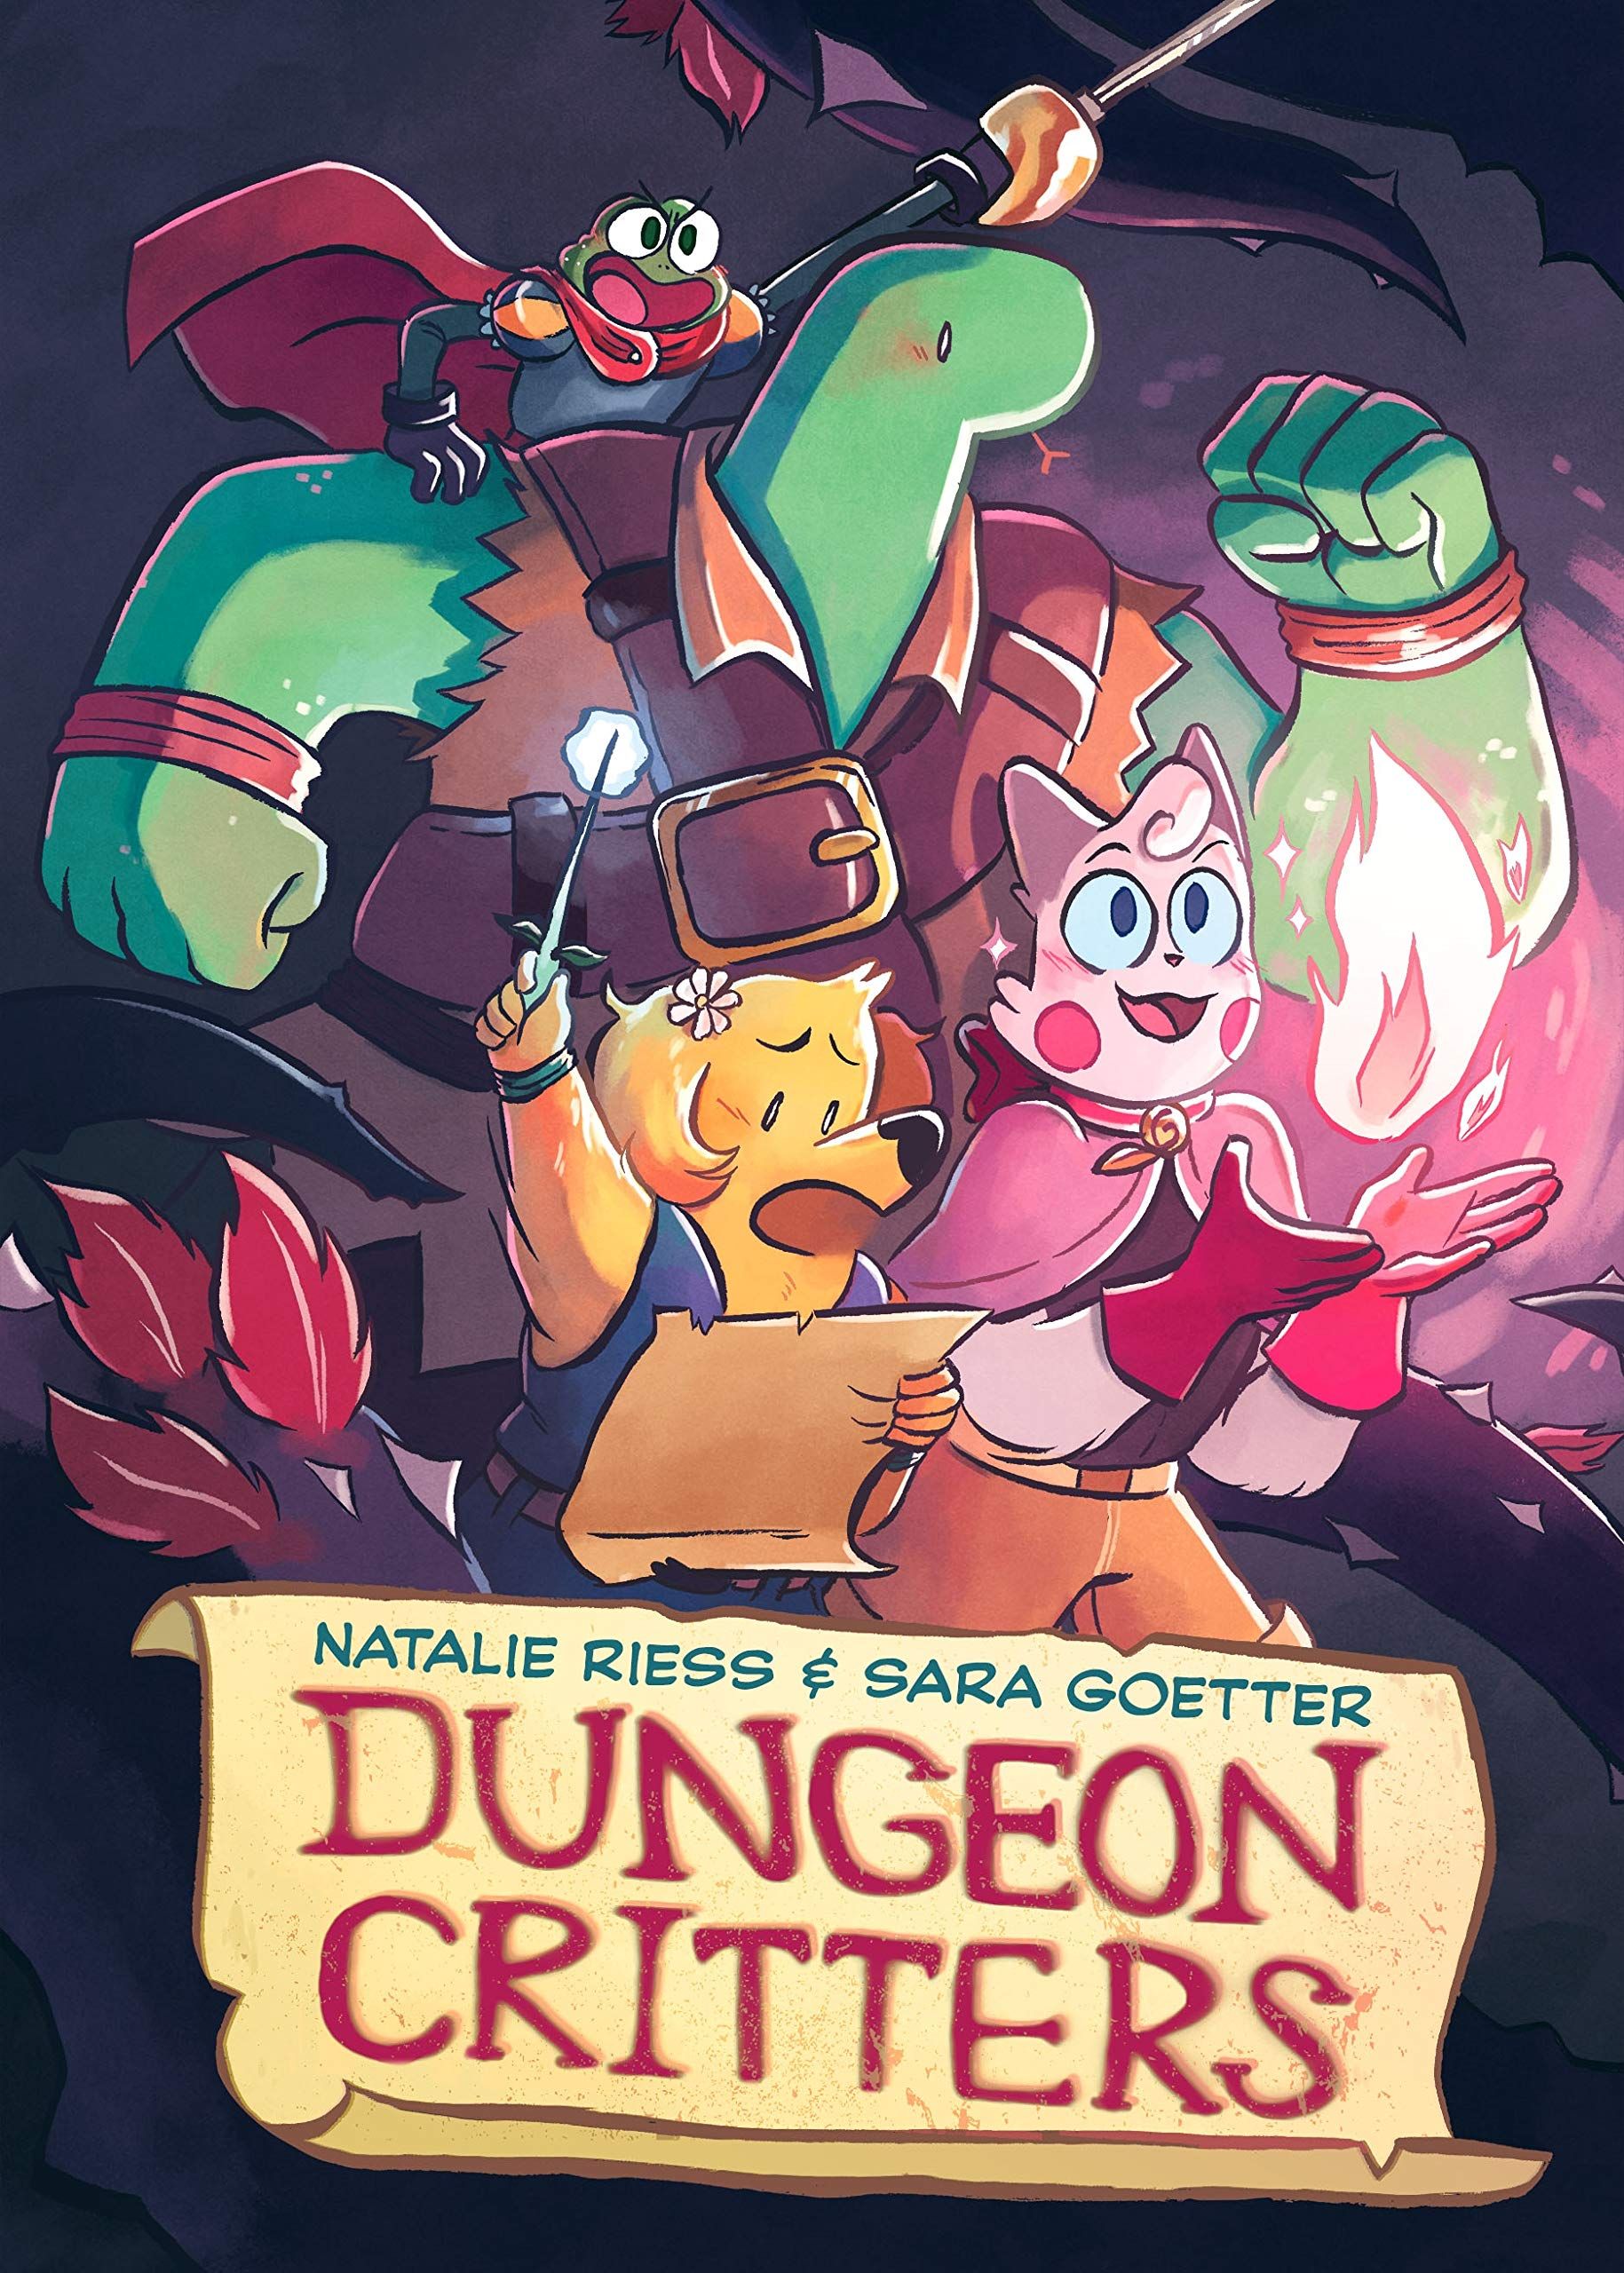 Dungeons Critters book cover